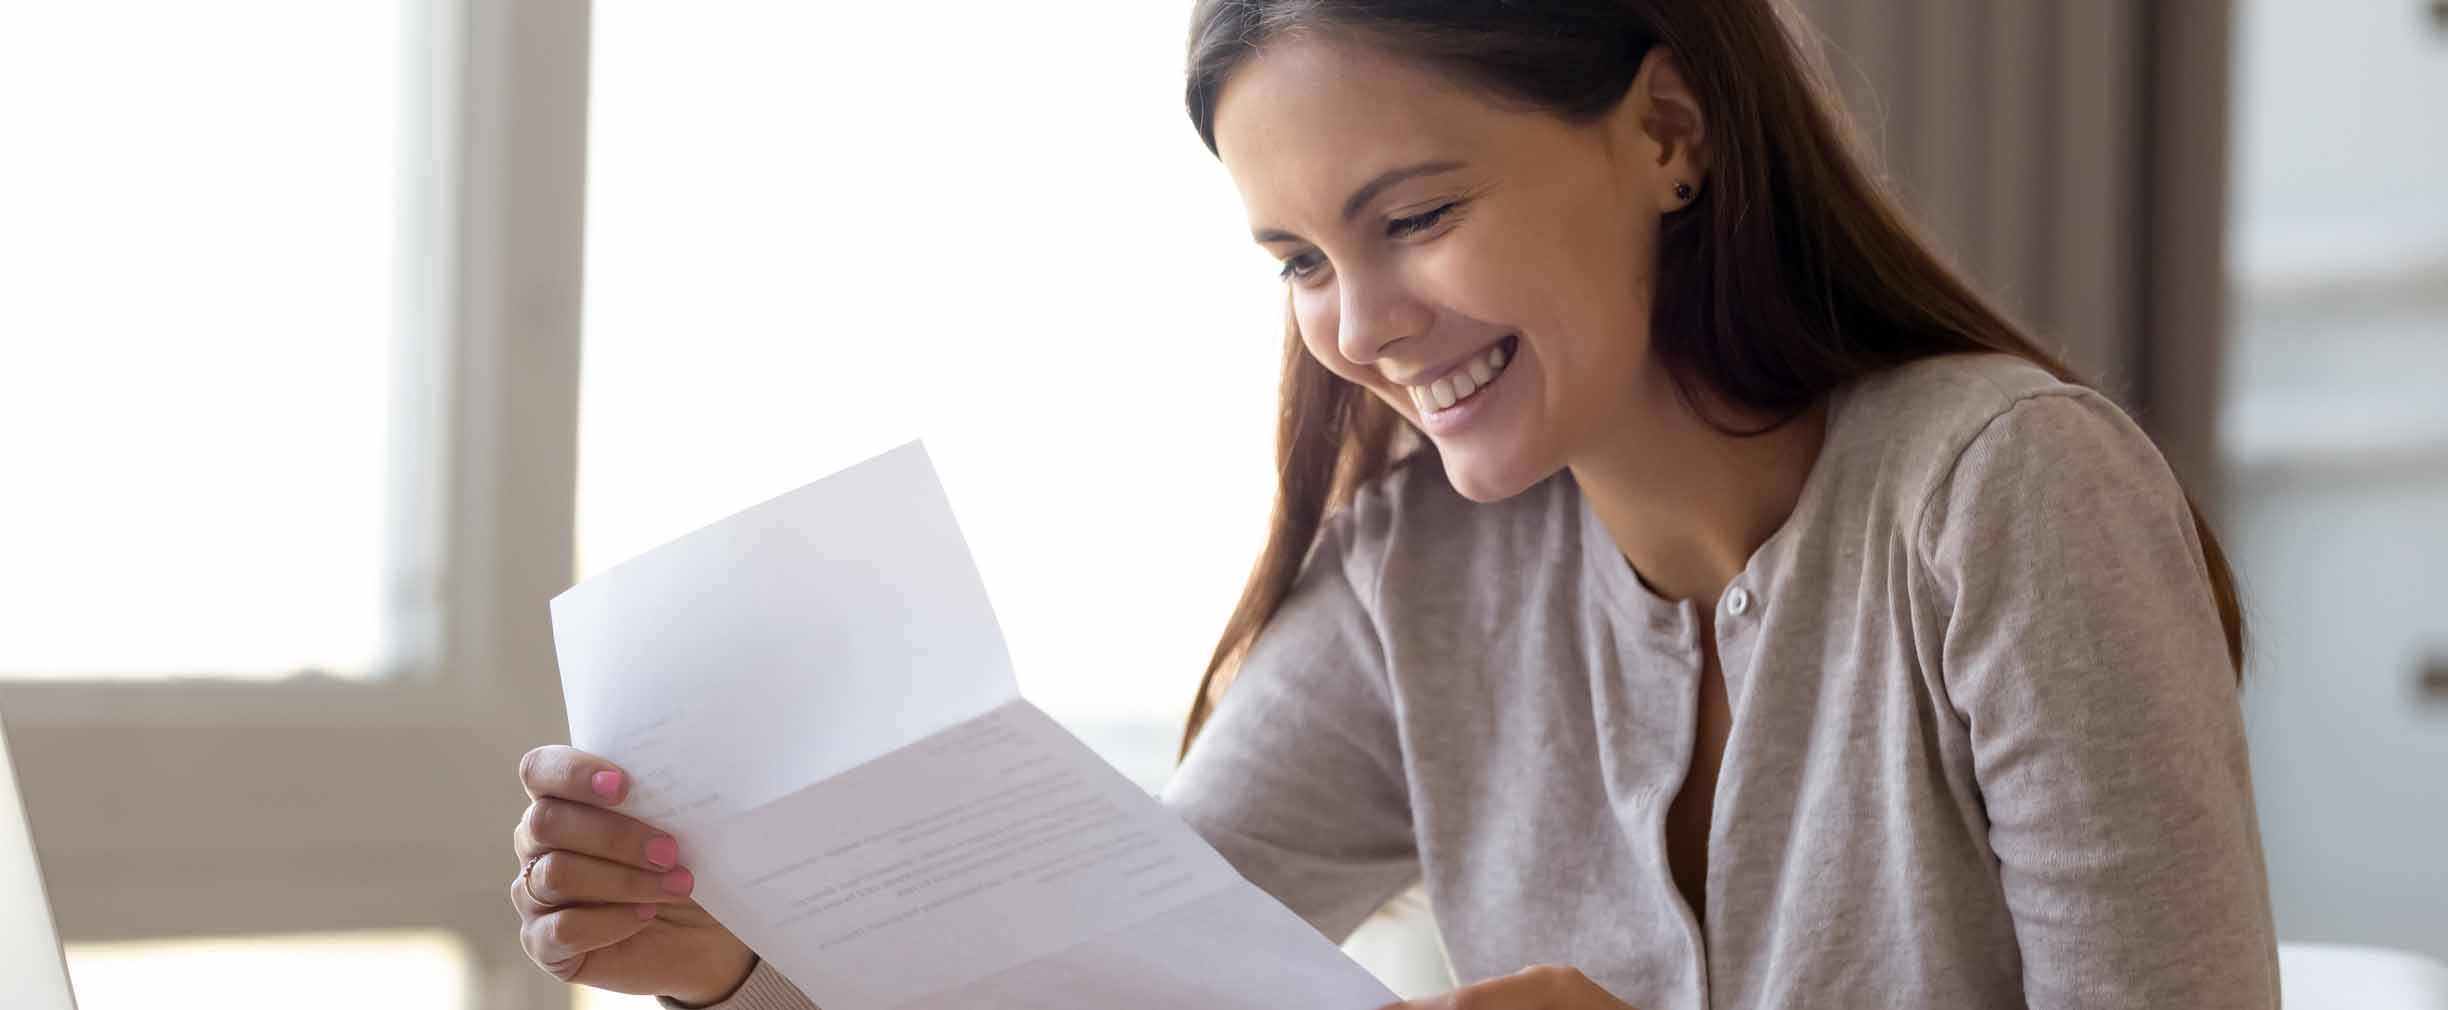 woman holding paper reading results